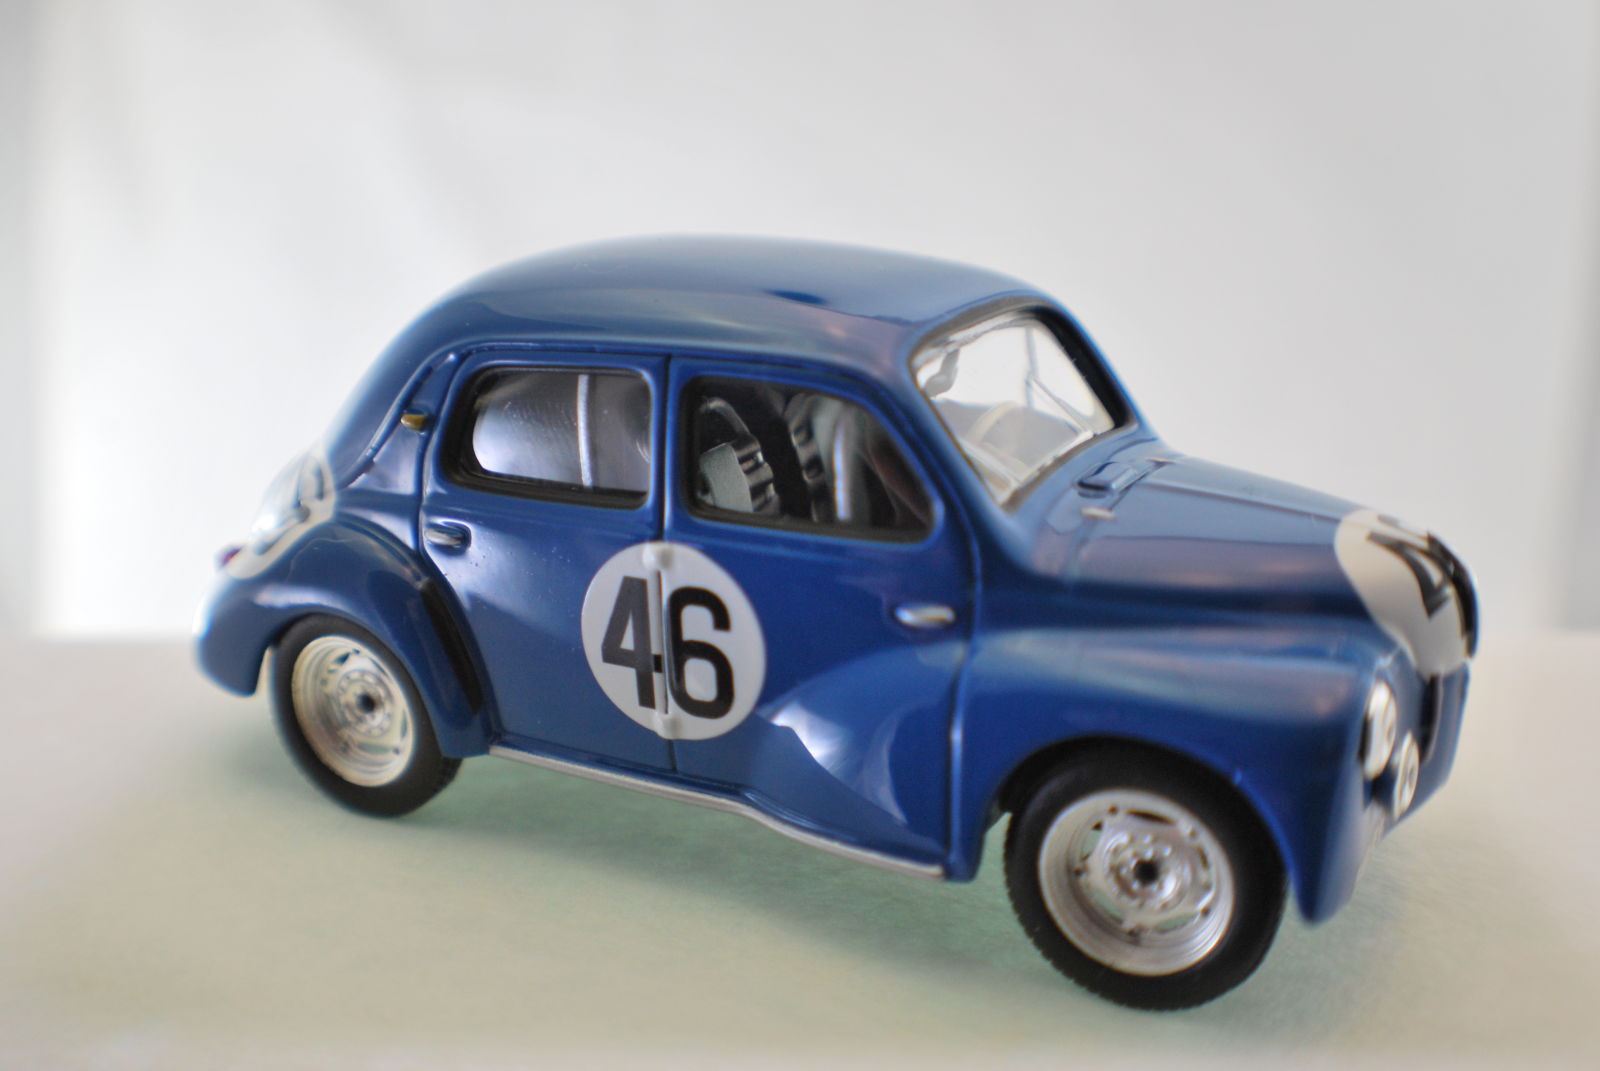 Illustration for article titled French Friday: RENAULT 4CV 1950 Le Mans class winner